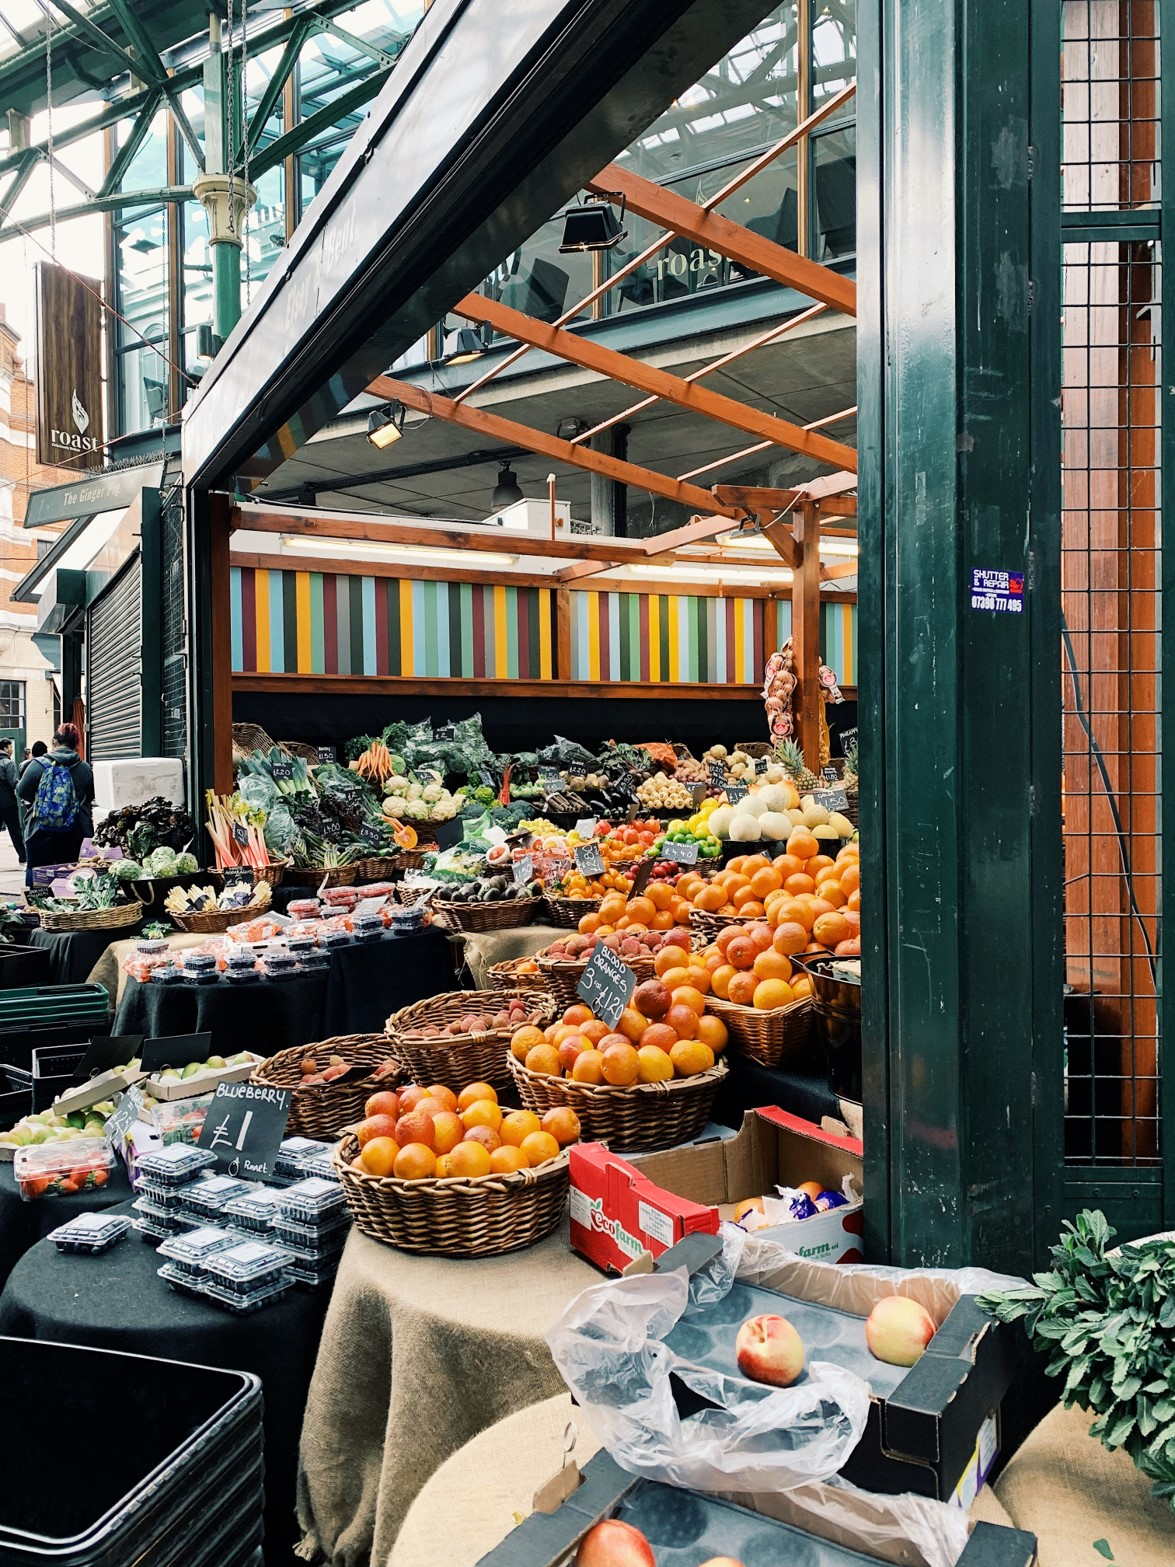 Borough Market stand in London, England